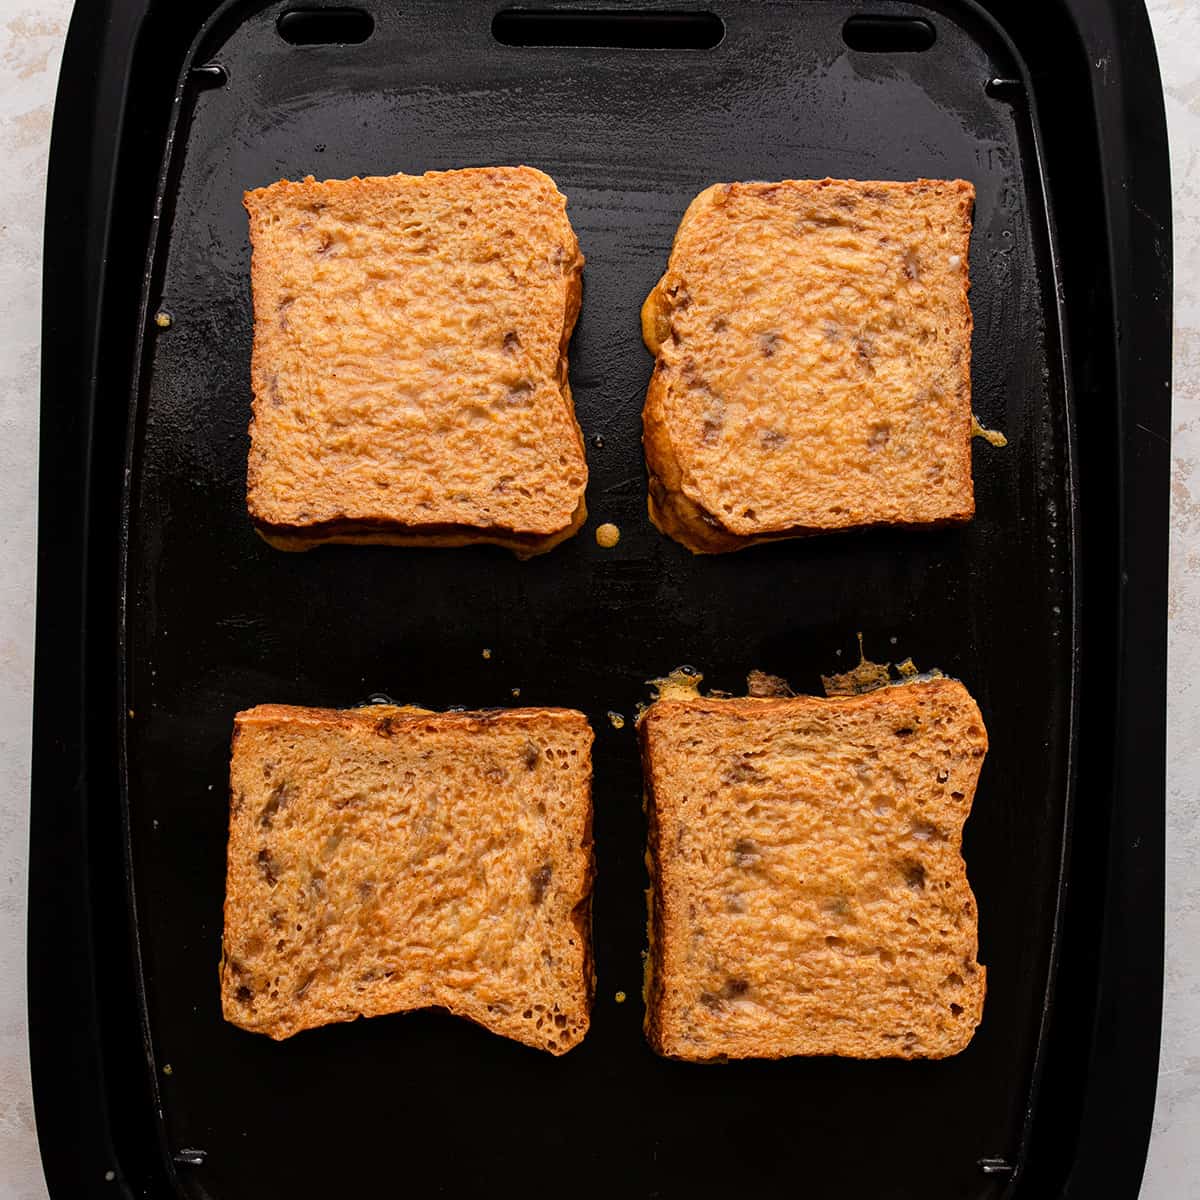 4 pieces of Pumpkin French Toast cooking on an electric griddle